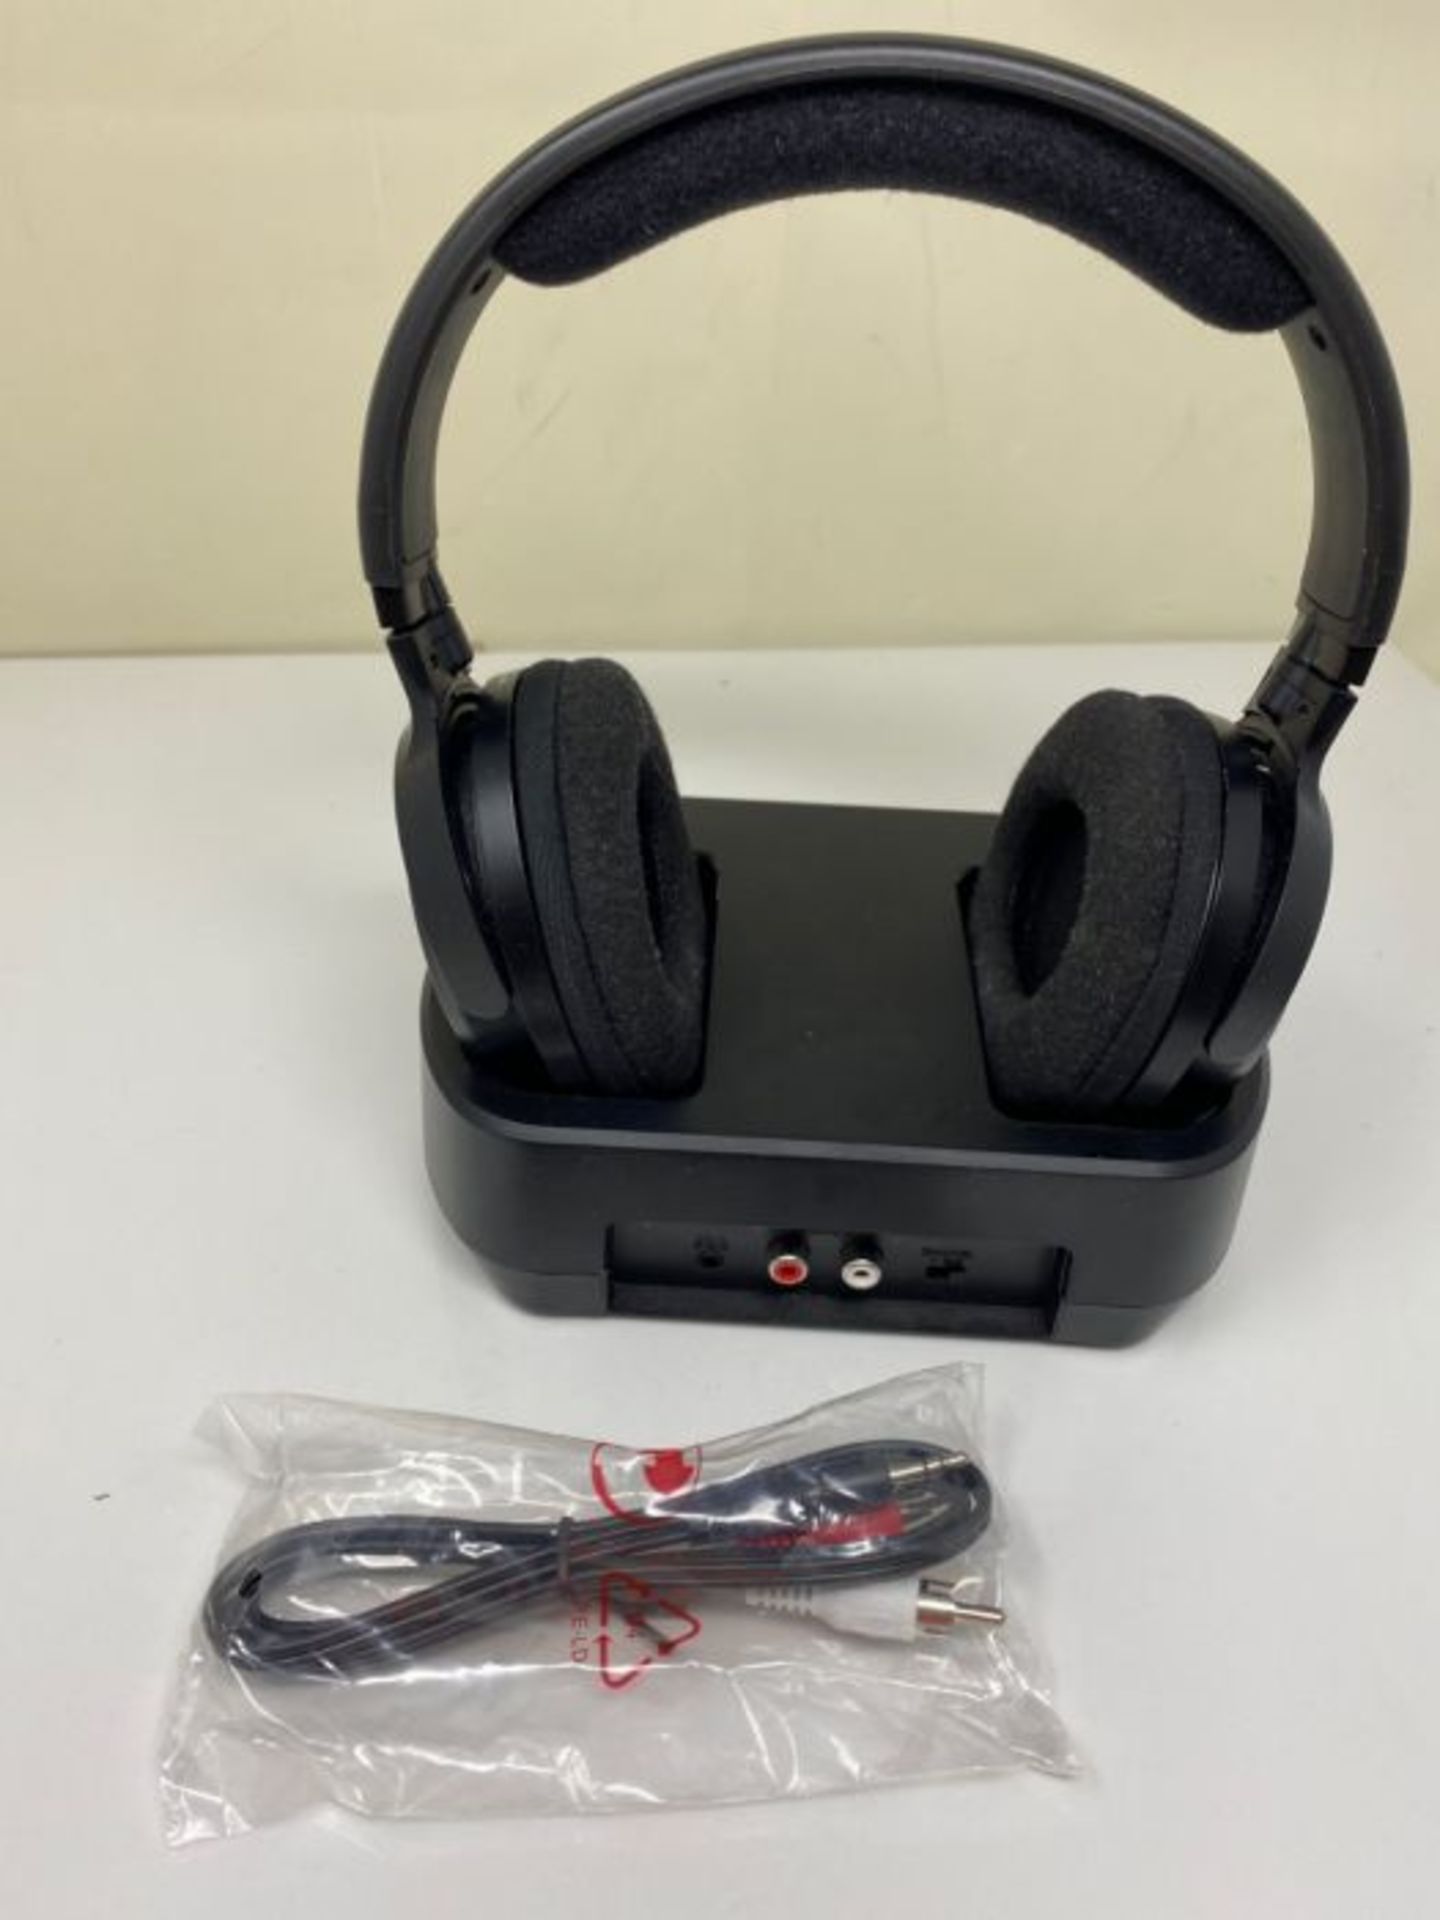 Thomson WHP 3001 Wireless Headphones for Portable Music Players 863 MHz, Black - Image 2 of 2